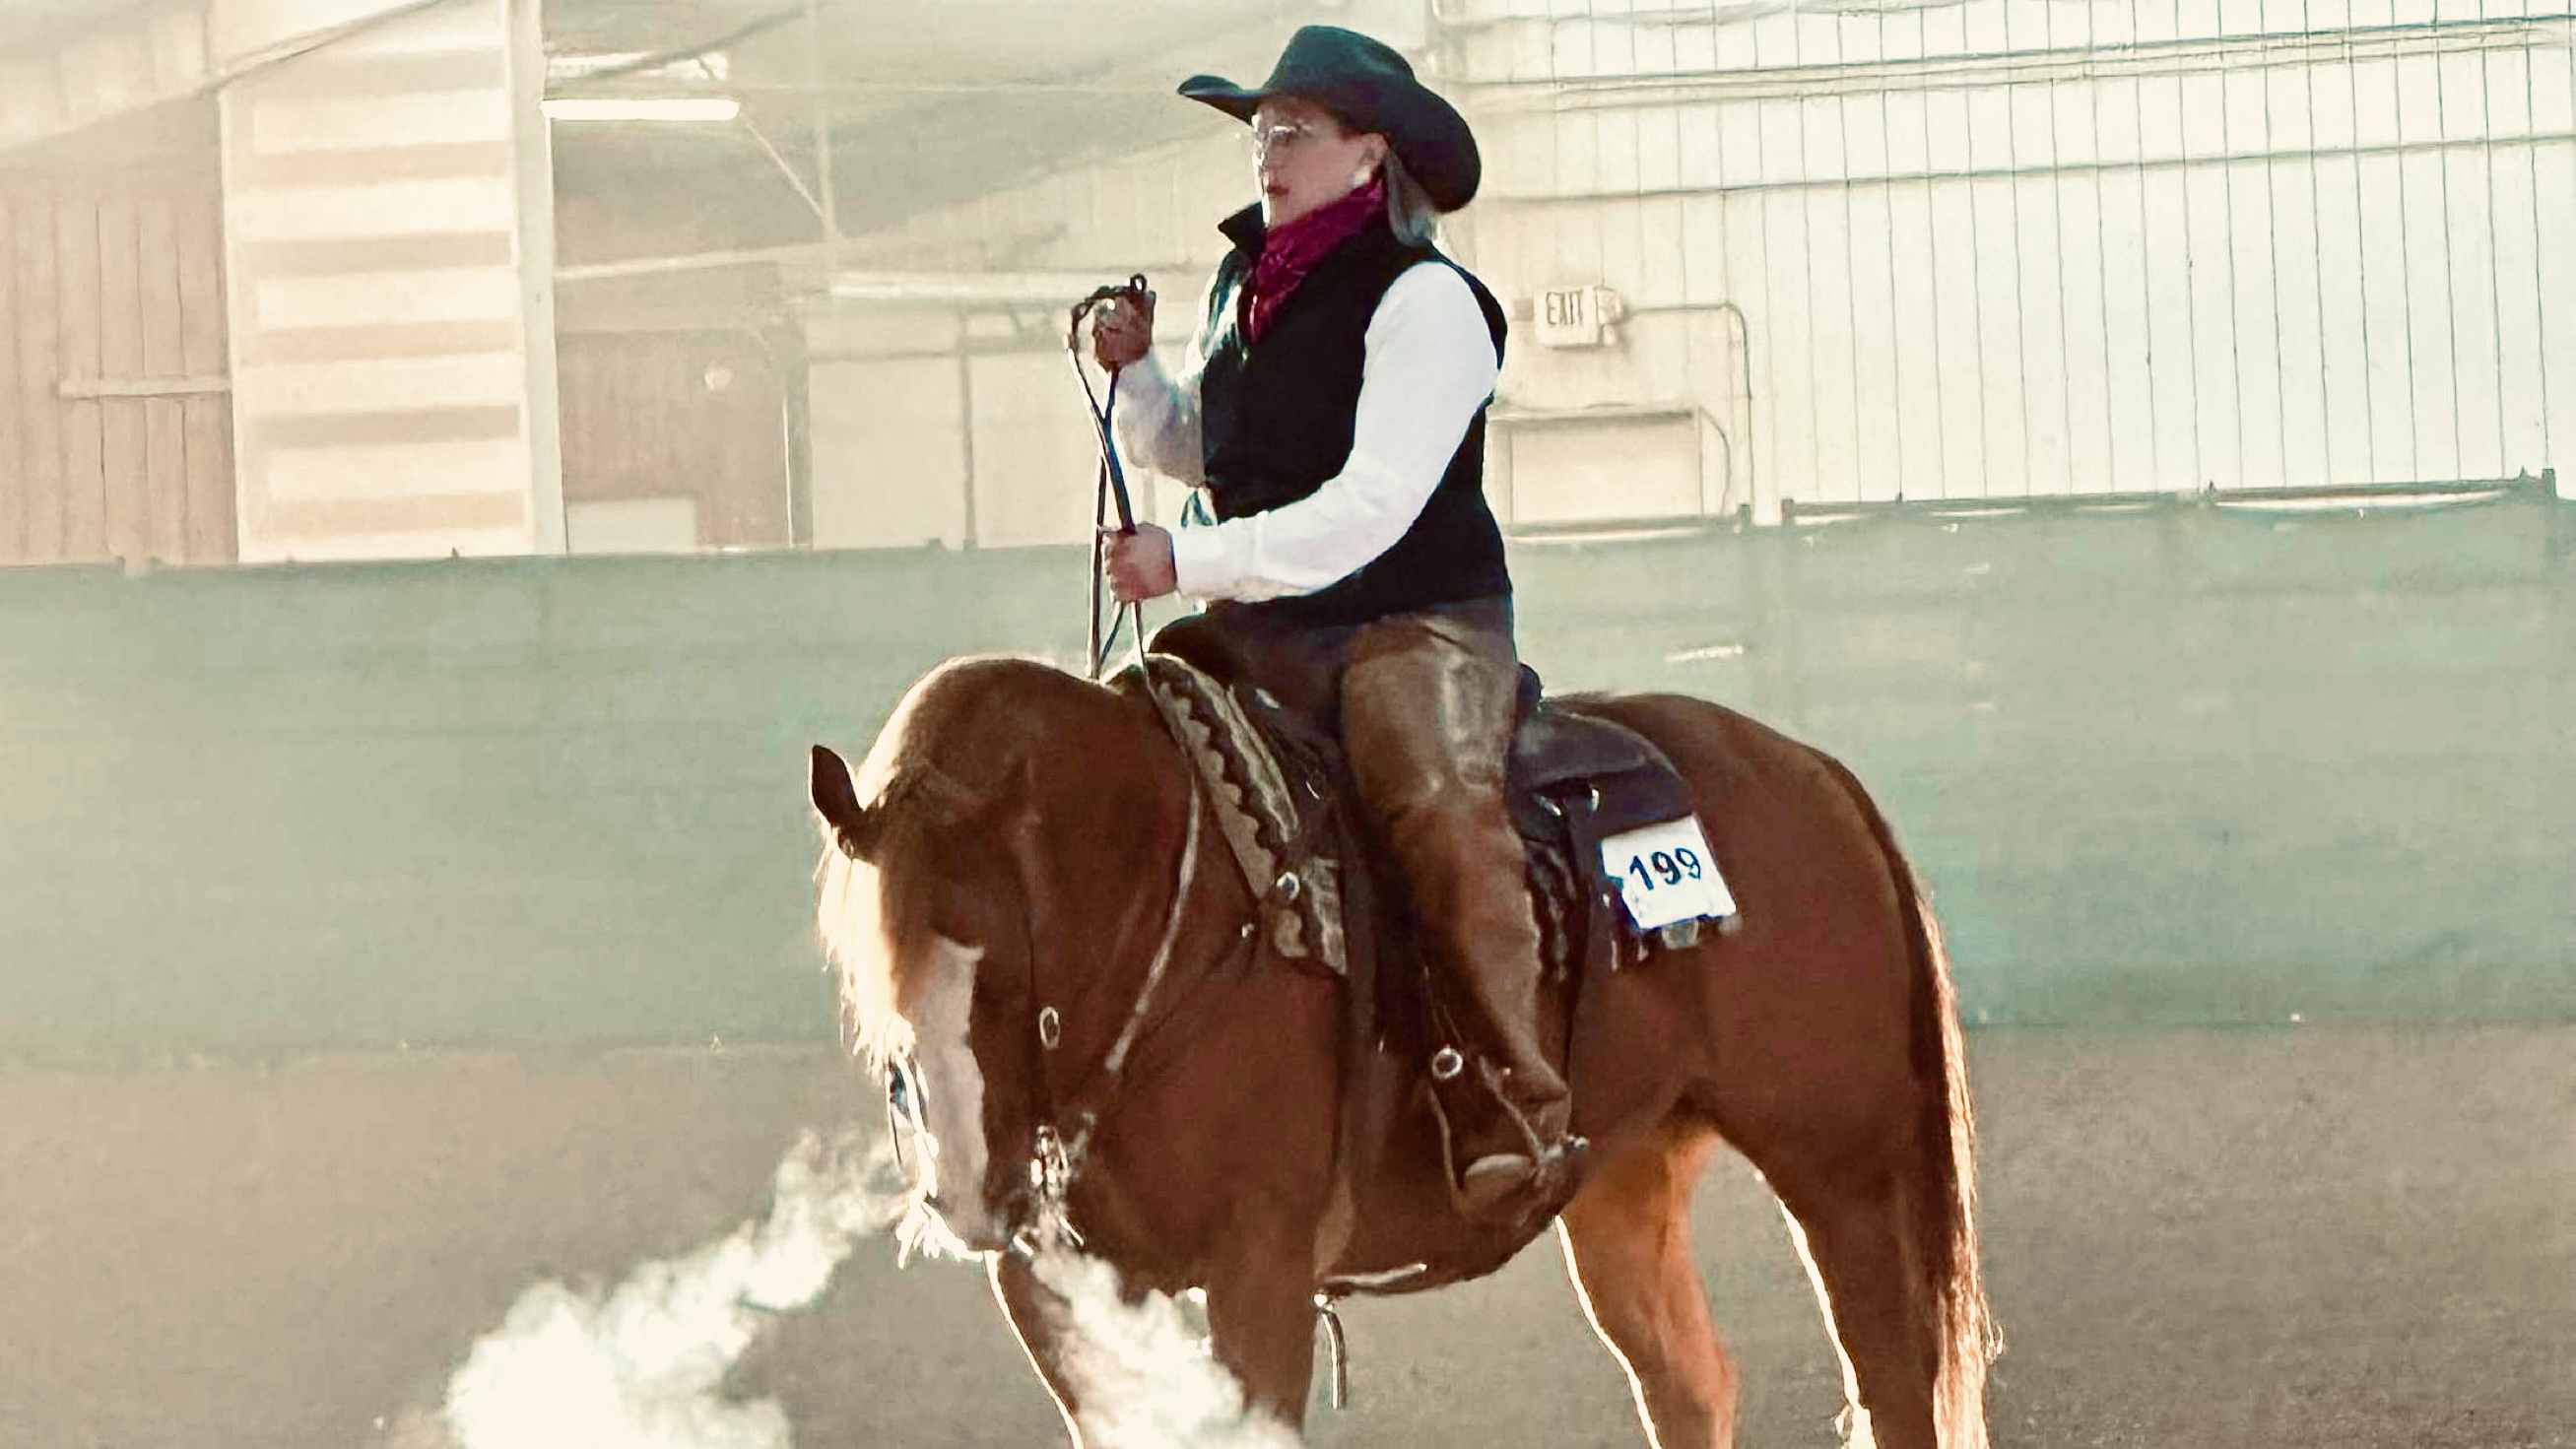 NCTA Associate Professor Joanna Hergenreder teaches and coaches on horseback and in the classroom.